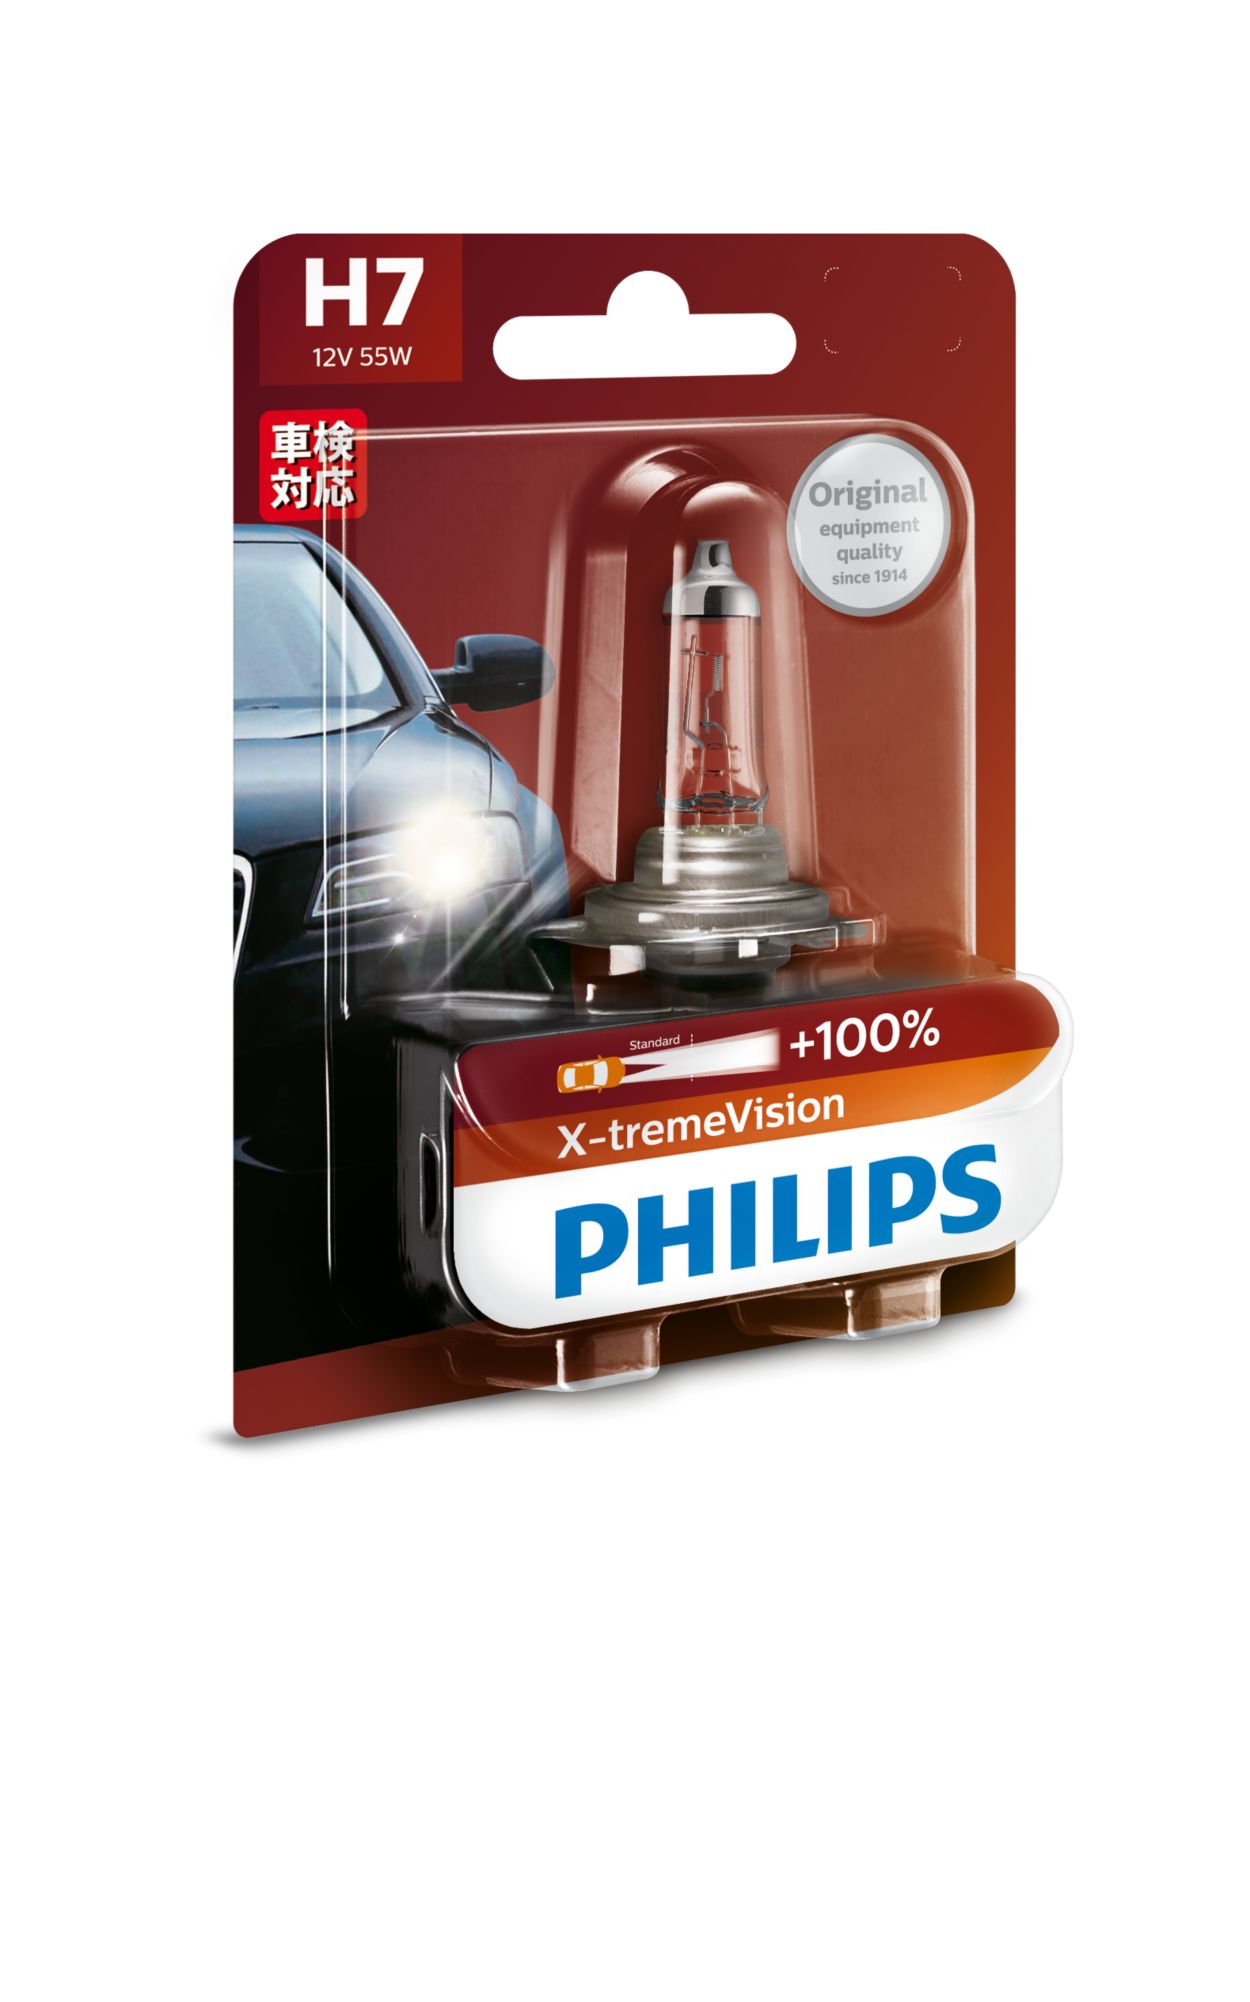 https://images.philips.com/is/image/philipsconsumer/d81f707f9a4c47e498fcafab011cb3d4?$jpglarge$&wid=1250